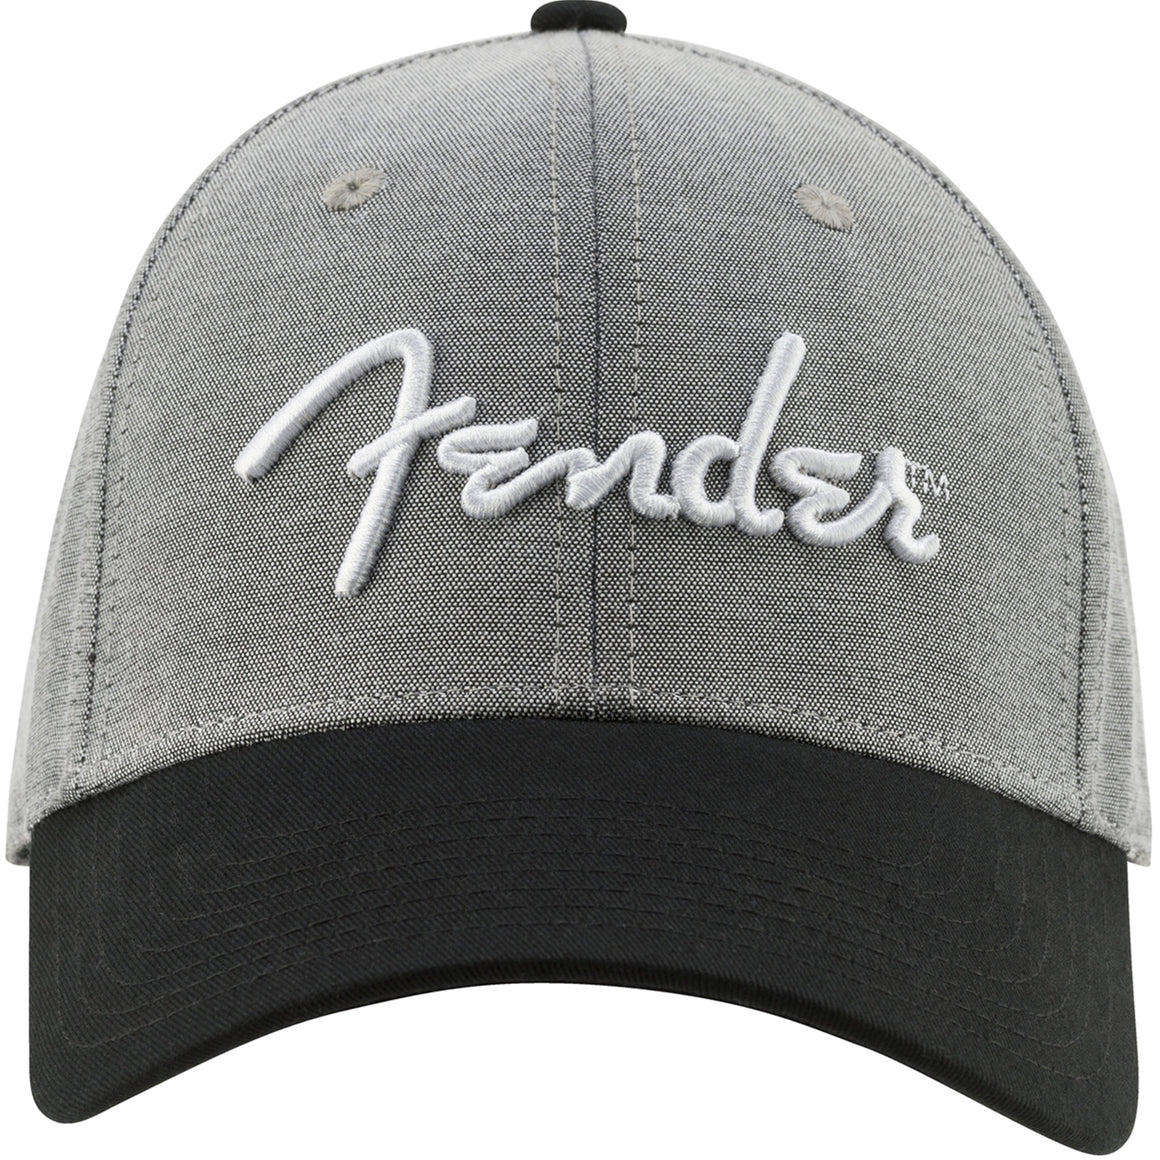 FENDER #9190121000 Hipster Dad Hat, Gray and Black, One Size Fits Most